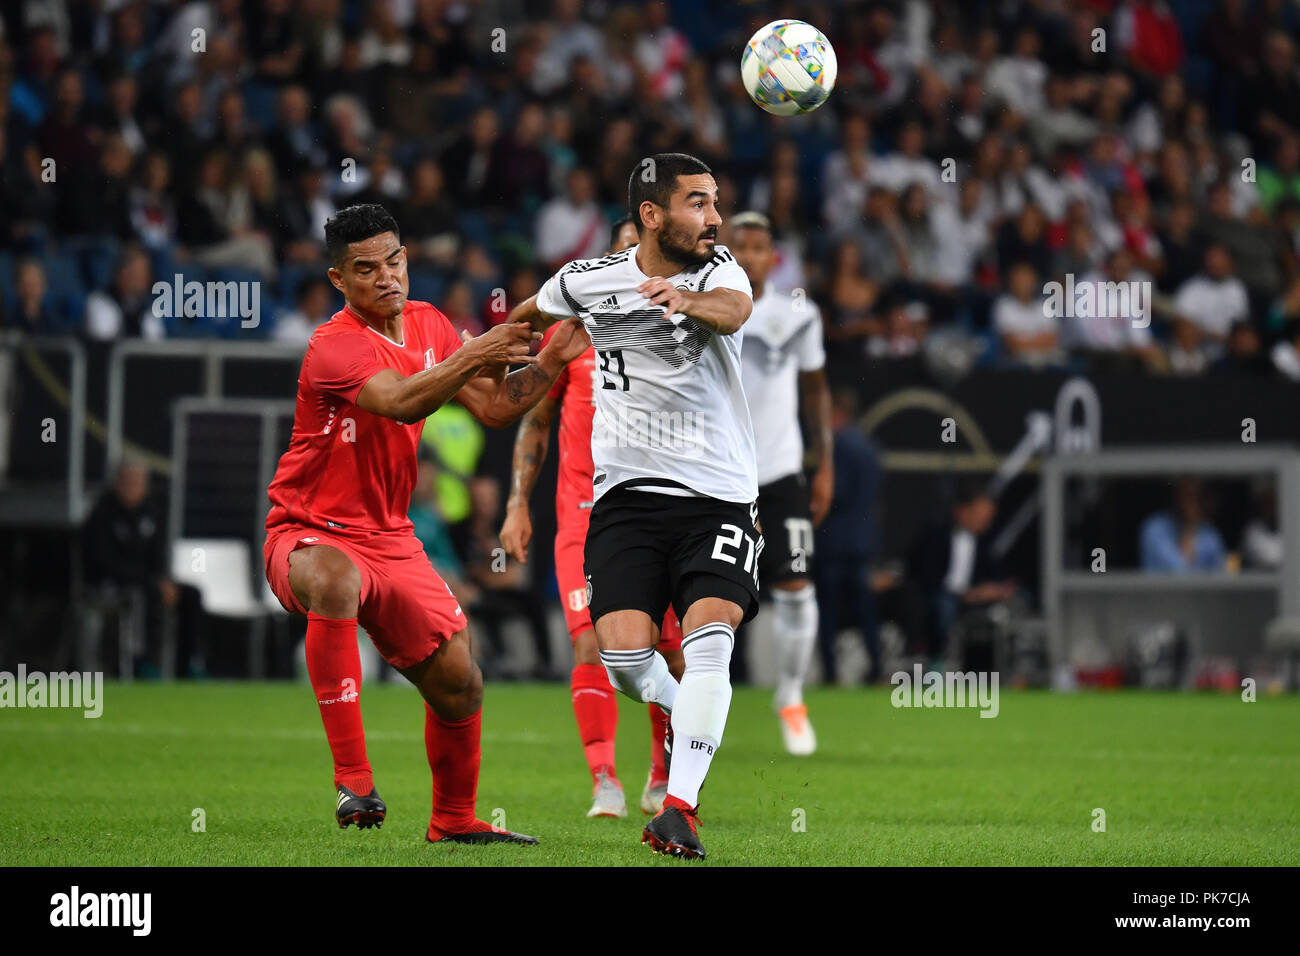 Ilkay GUENDOGAN (GER), action, duels.versus Anderson SANTAMARIA (PER). Soccer Laenderspiel, Germany (GER) -Peru (PER) 2-1 on 09/09/2018 in Sinsheim/Wirsol Rhein-Neckar-Arena. DFB REGULATIONS PROHIBIT ANY USE OF PHOTOGRAPH AS IMAGE SEQUENCES AND/OR QUASI VIDEO. | usage worldwide Stock Photo